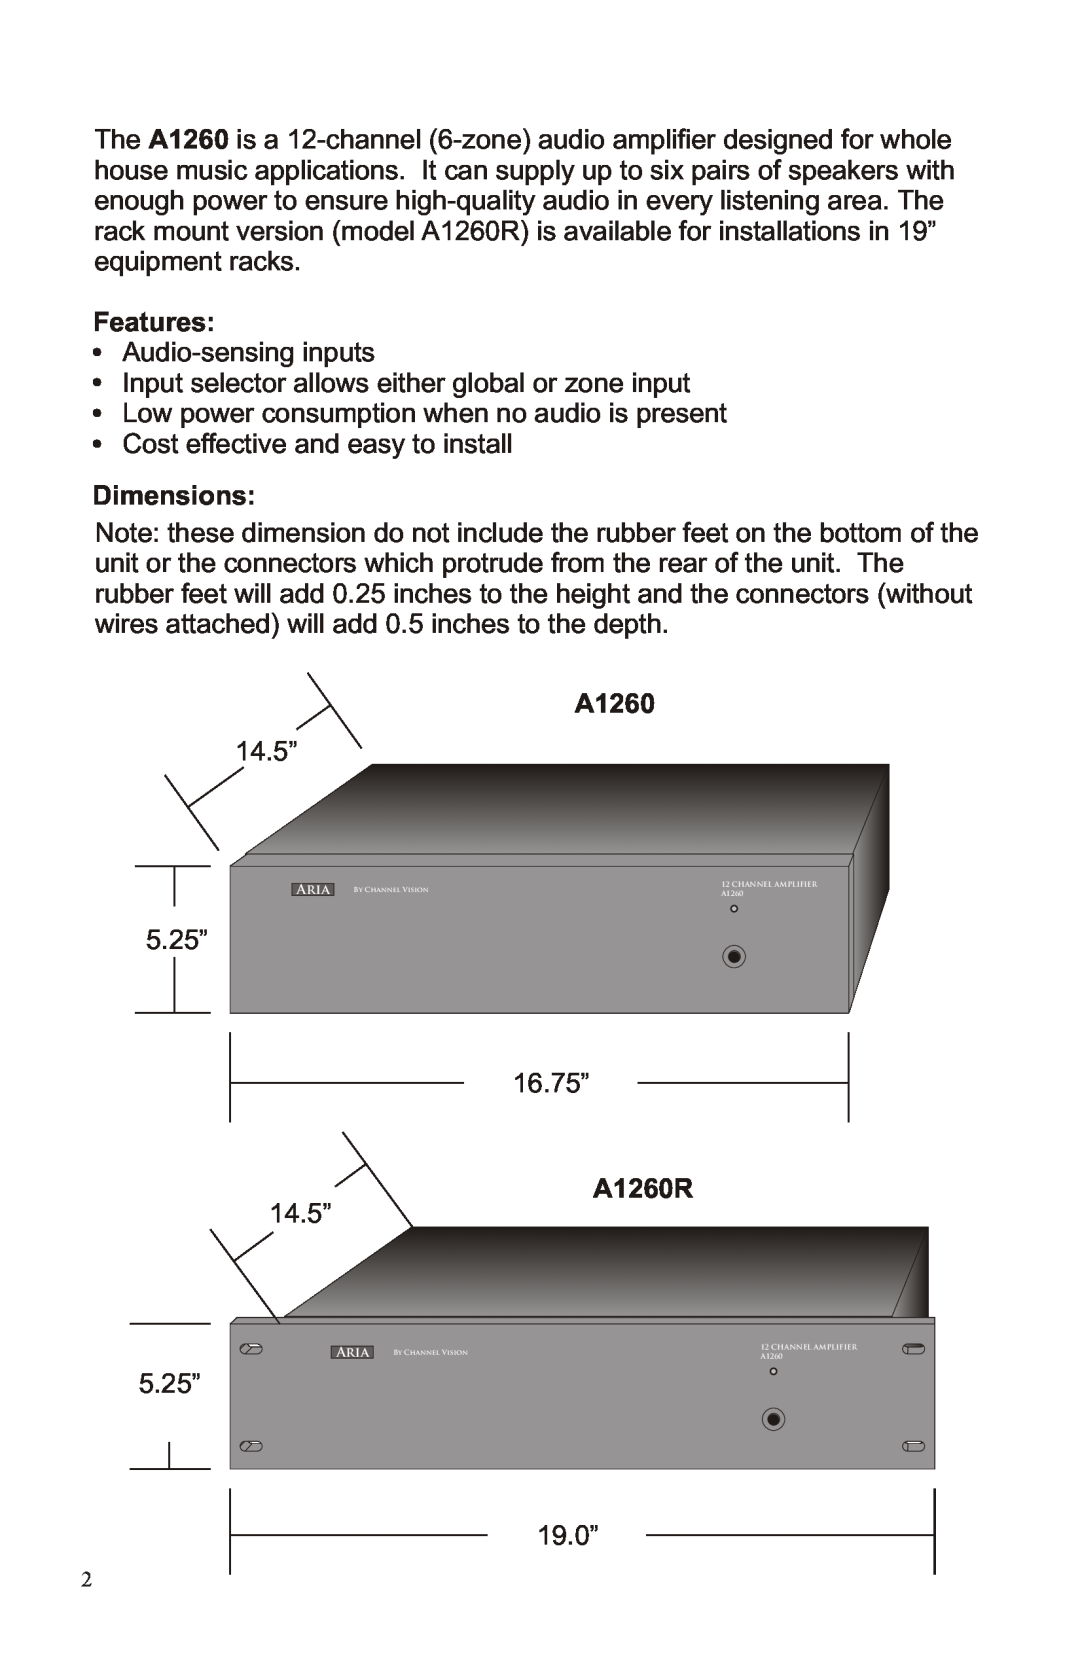 Channel Vision manual Features, Dimensions, A1260R 